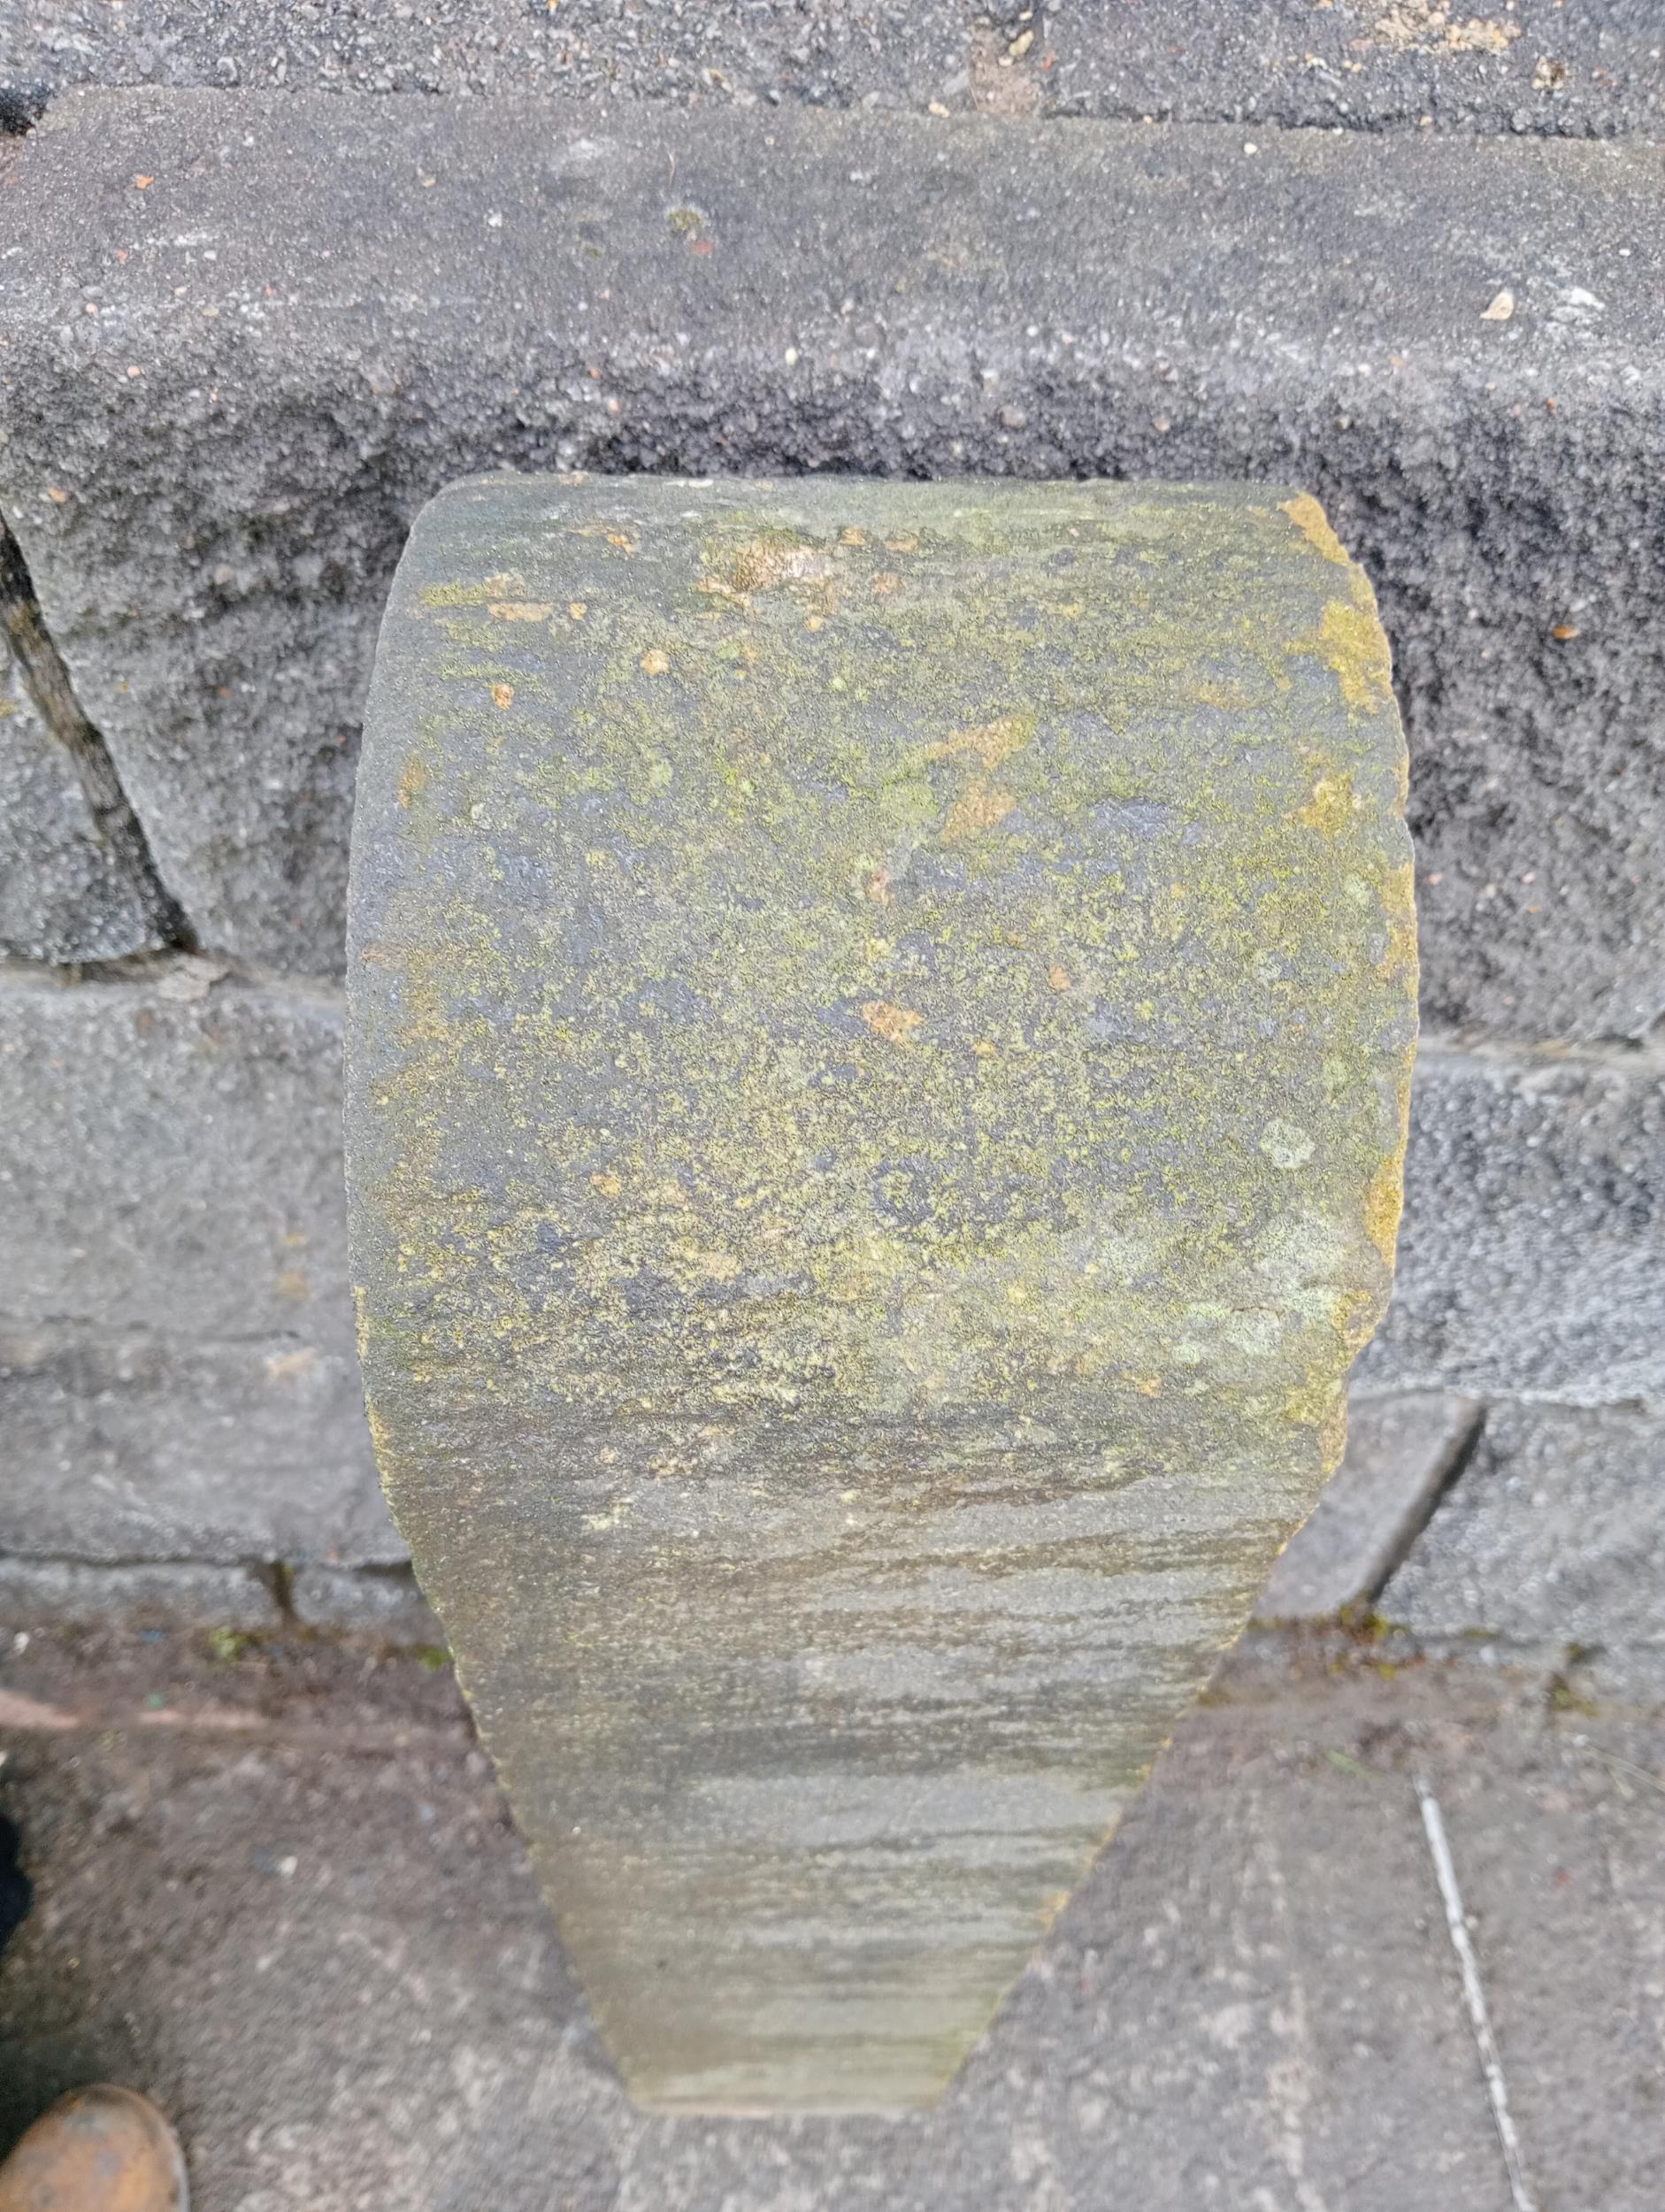 Sandstone gate post bullnose top {H 85cm x W 16cm x D 20cm }. (NOT AVAILABLE TO VIEW IN PERSON) - Image 3 of 4